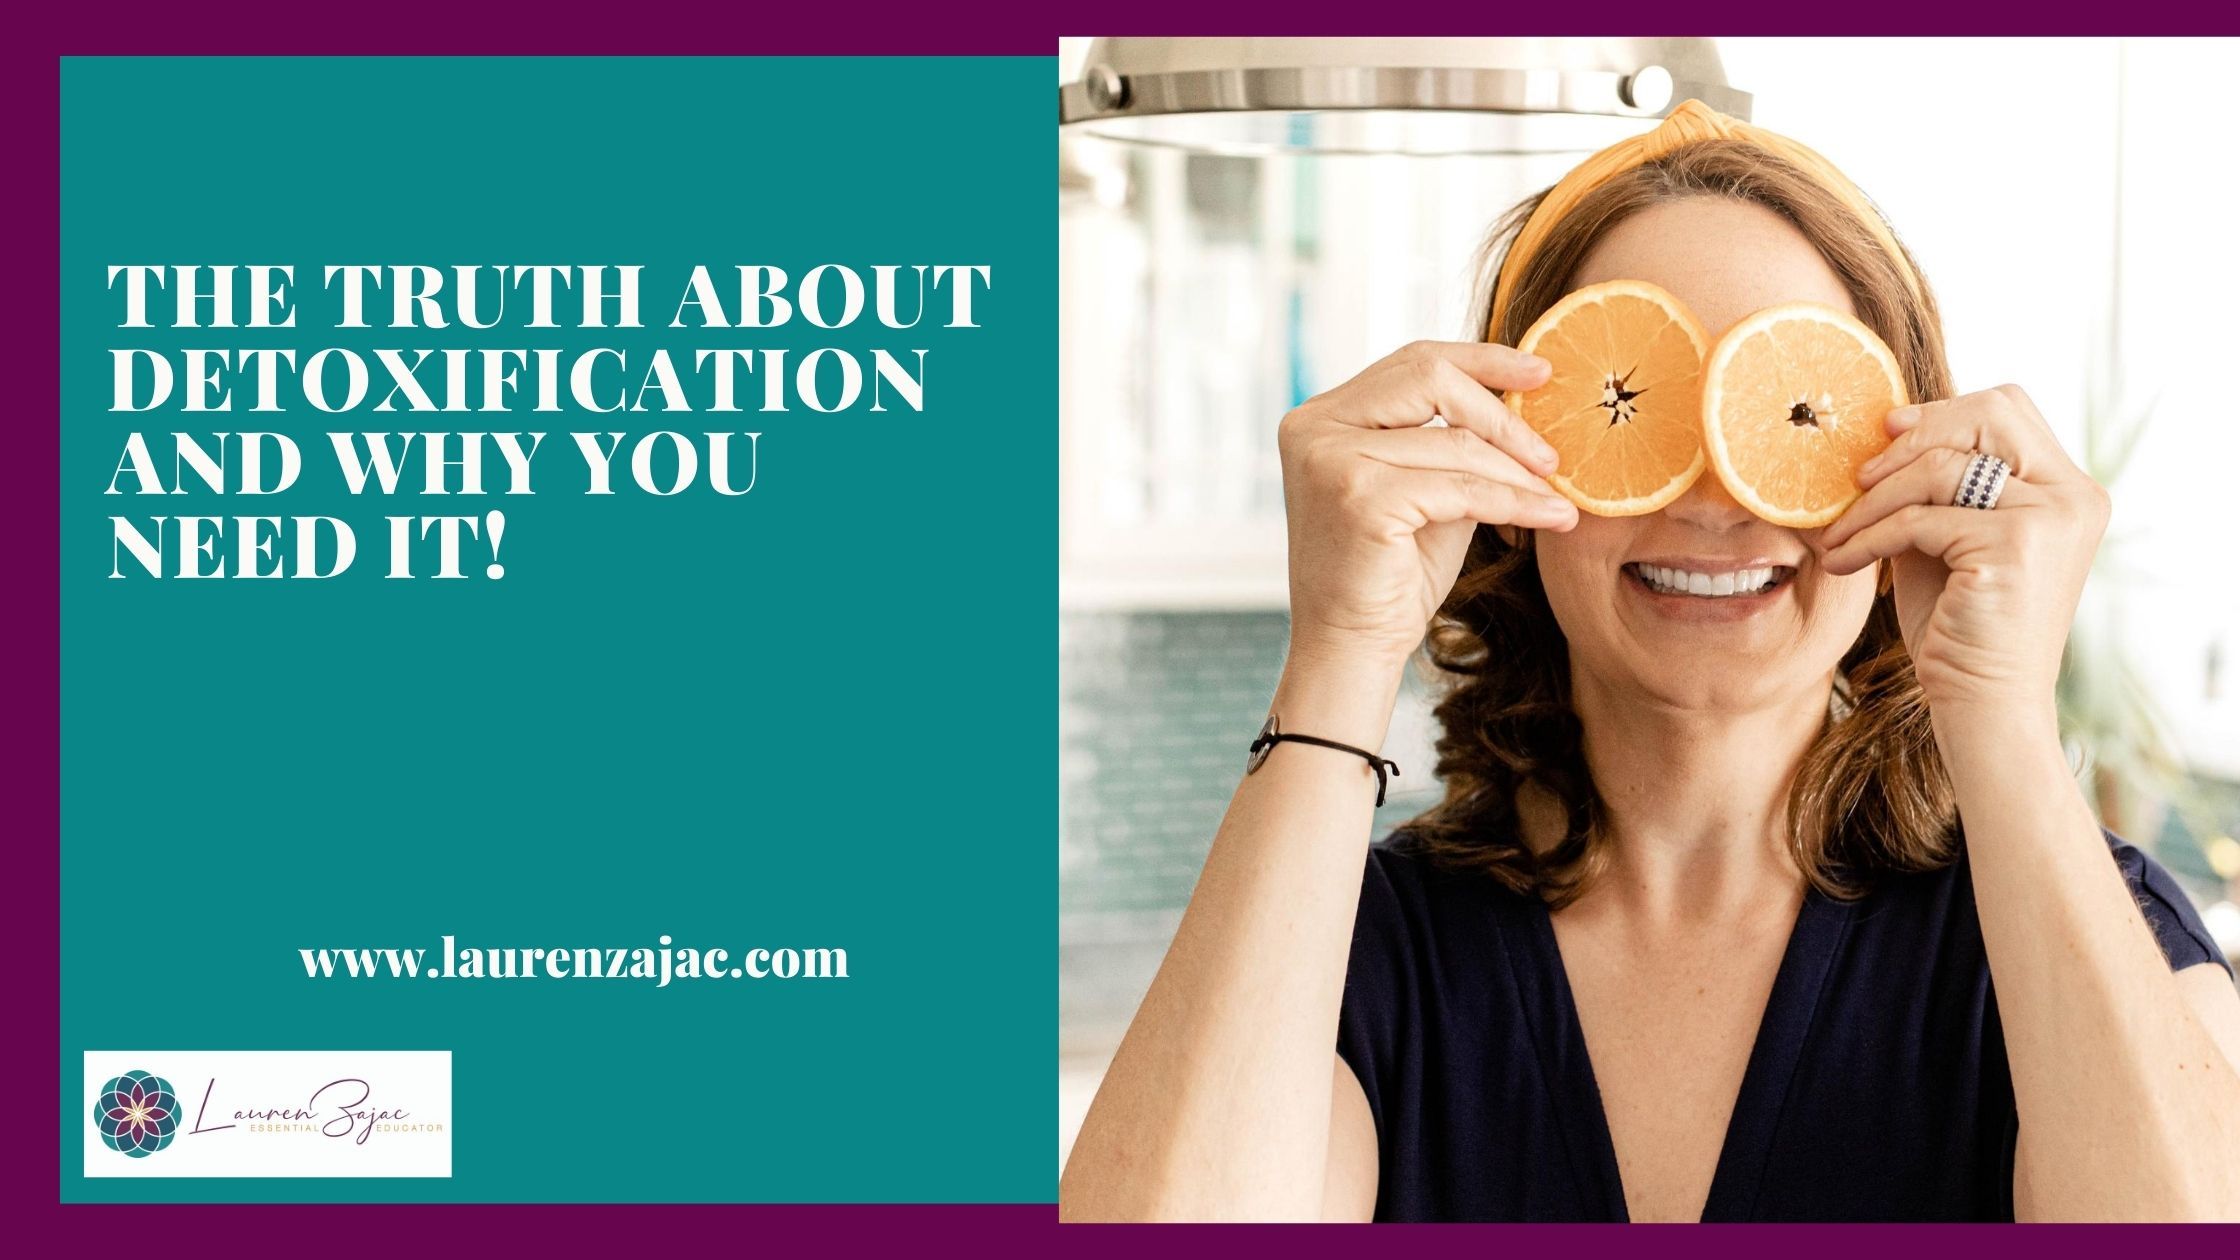 The Truth About Detoxification Learn more with Lauren Zajac